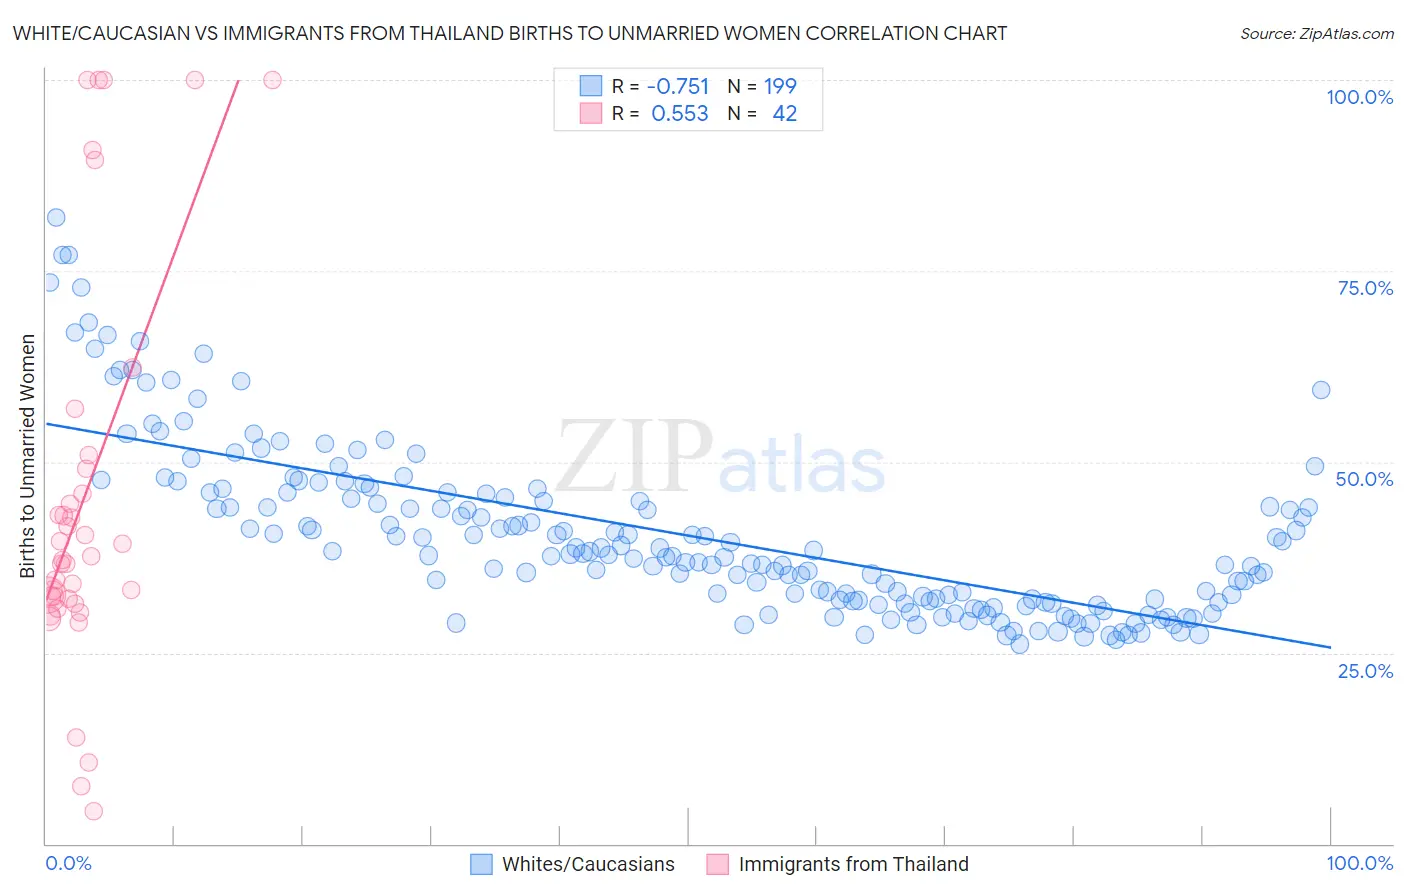 White/Caucasian vs Immigrants from Thailand Births to Unmarried Women